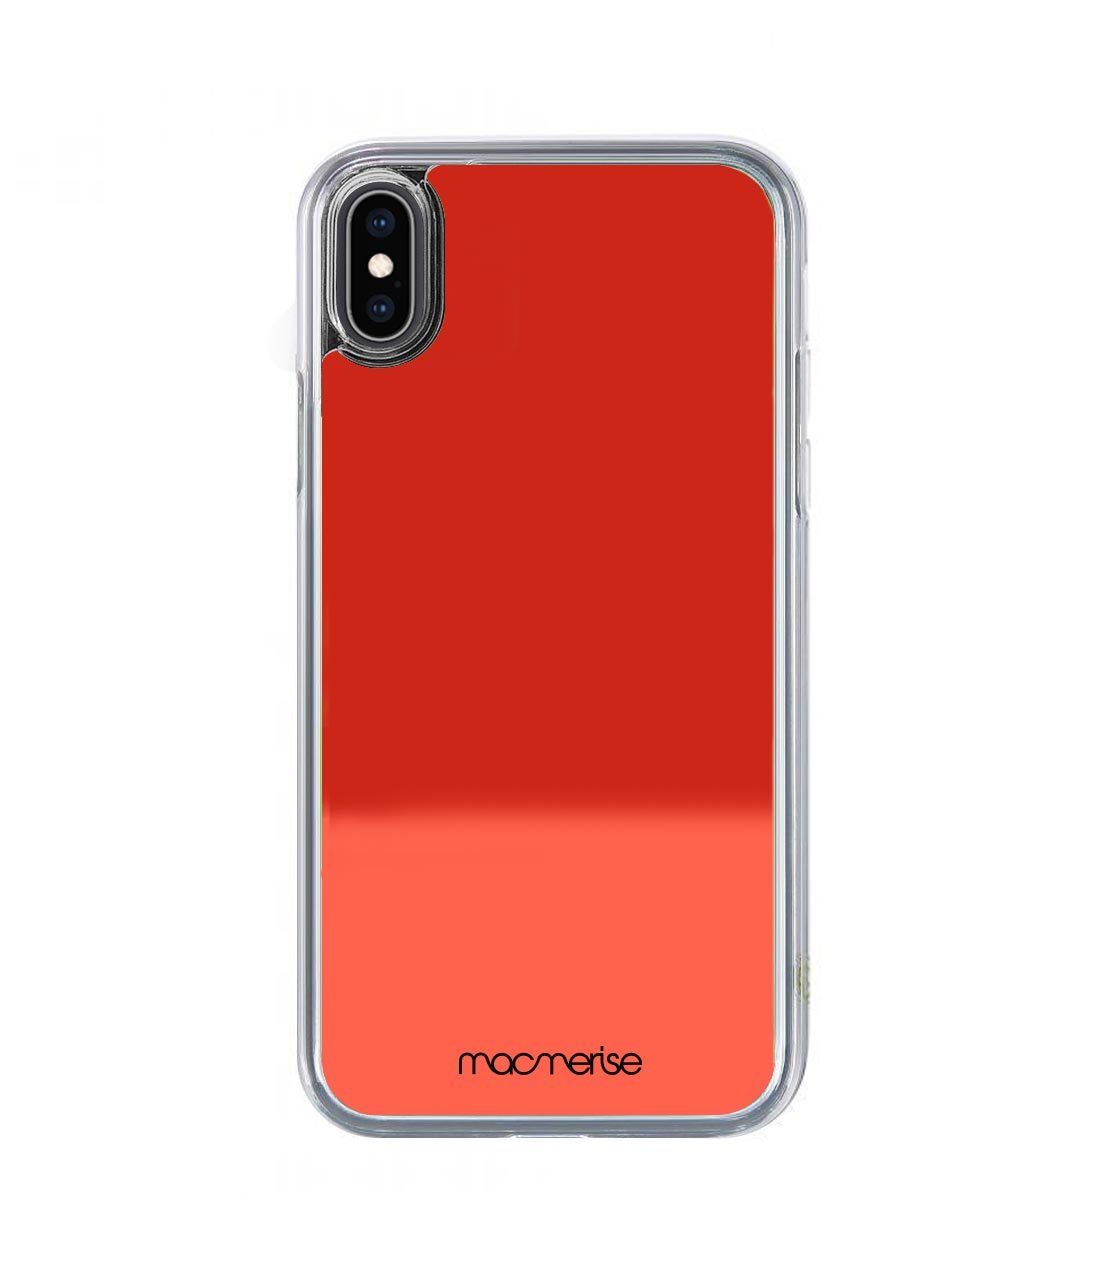 Neon Sand Red - Neon Sand Phone Case for iPhone XS Max